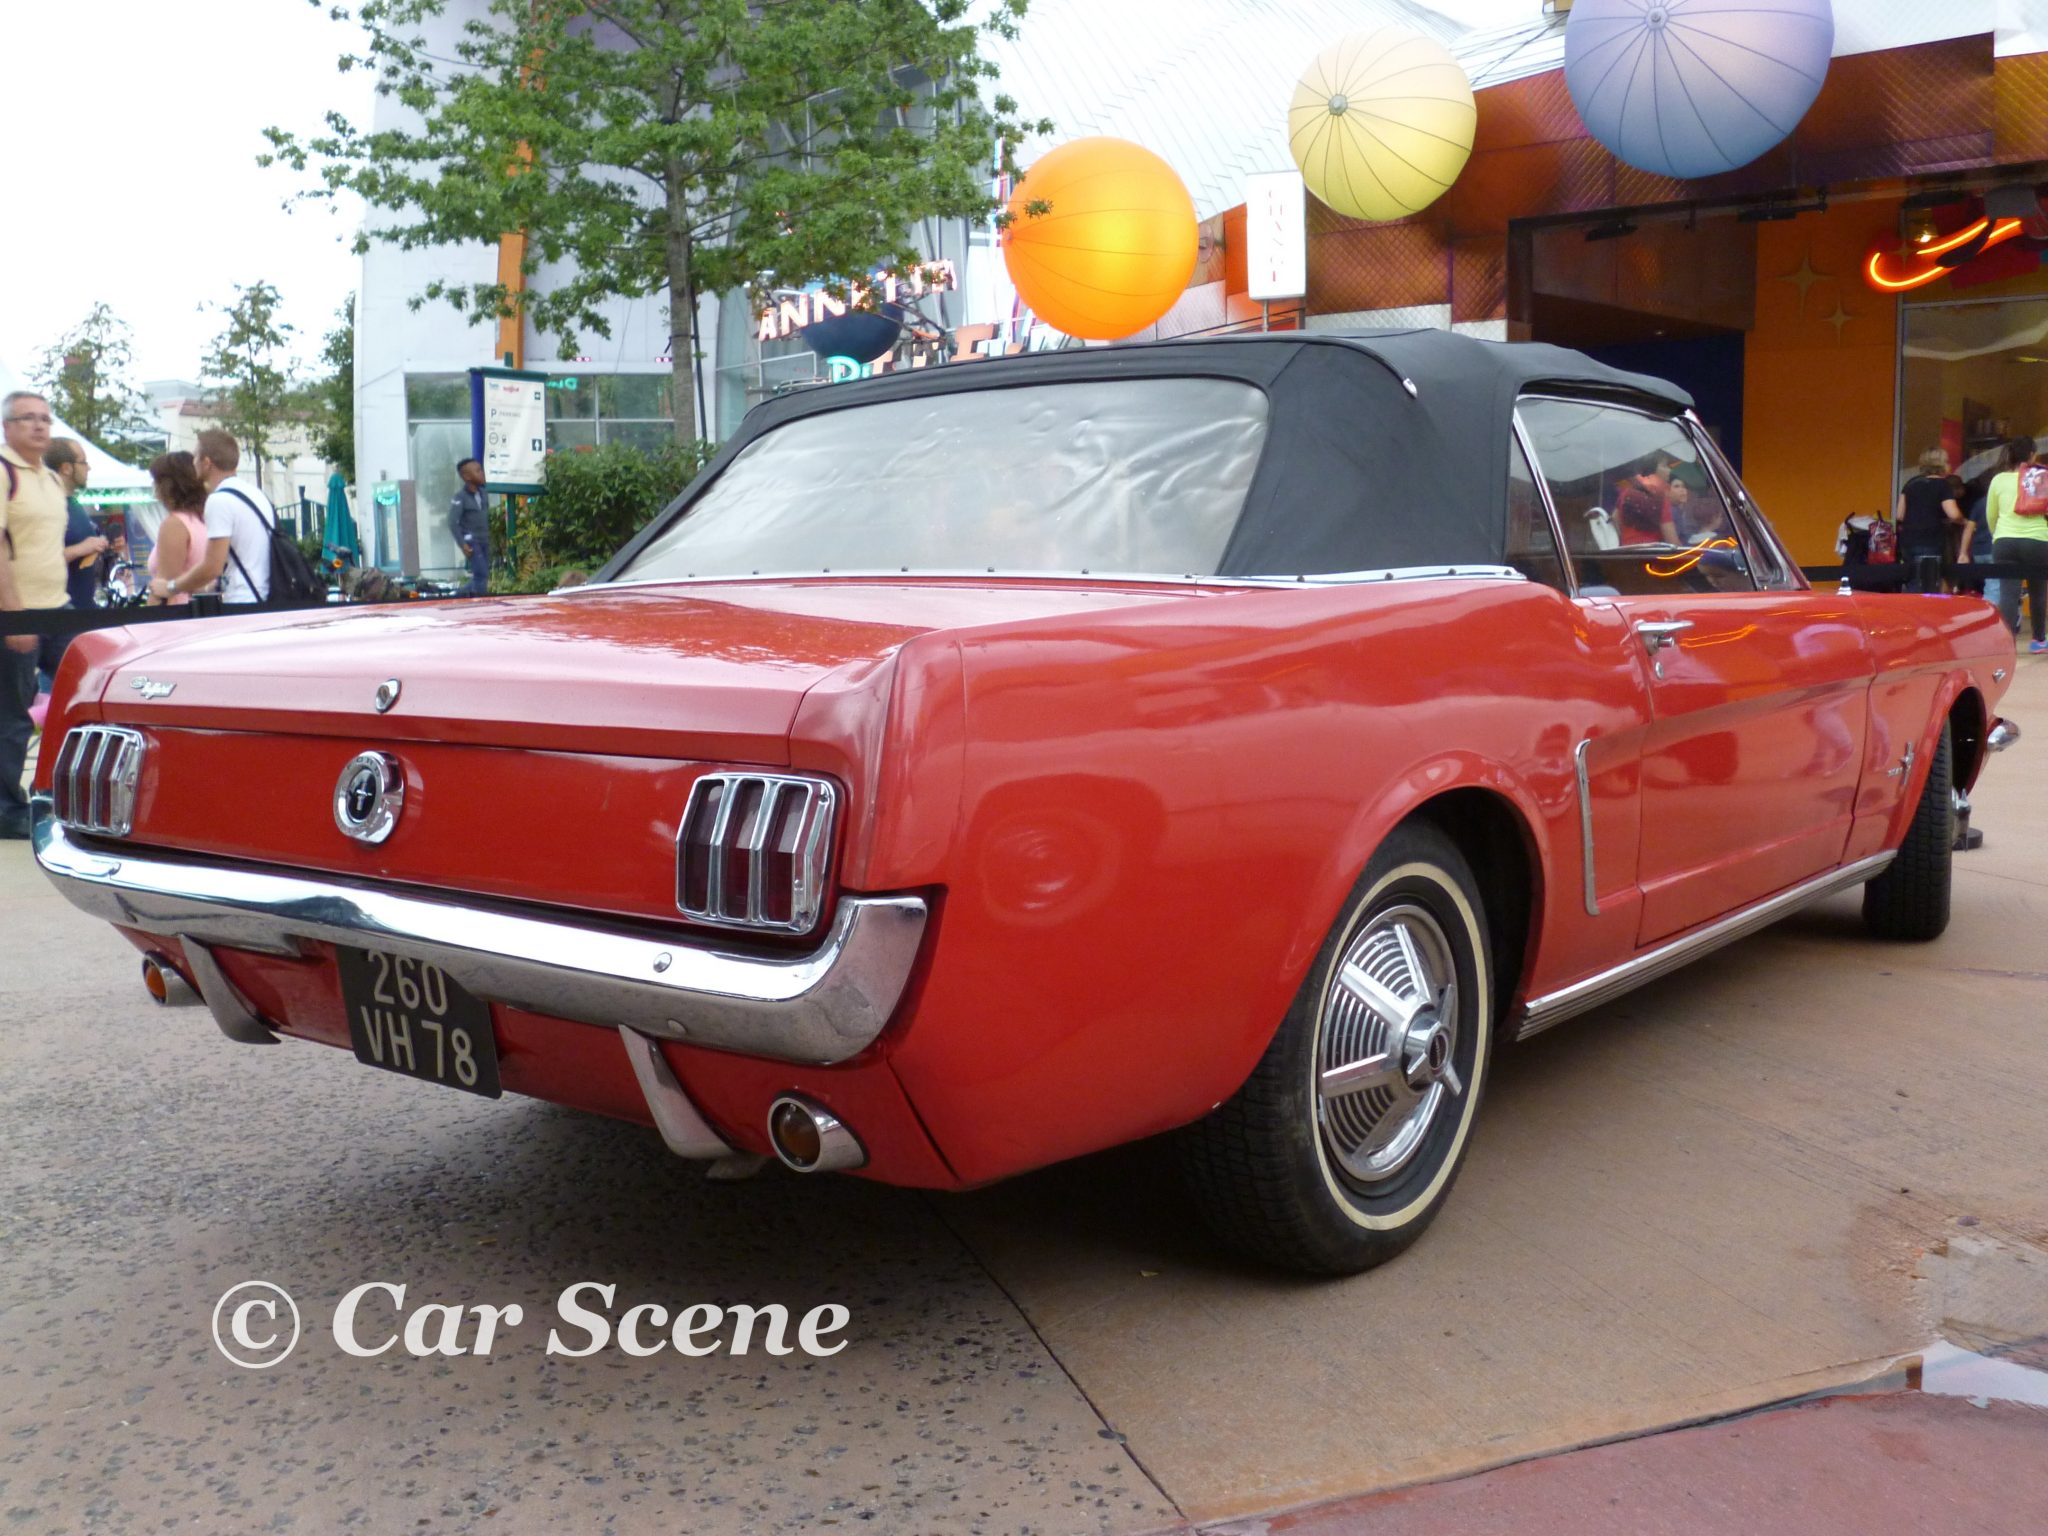 1968 Ford Mustang Cabriolet rear three quarters view